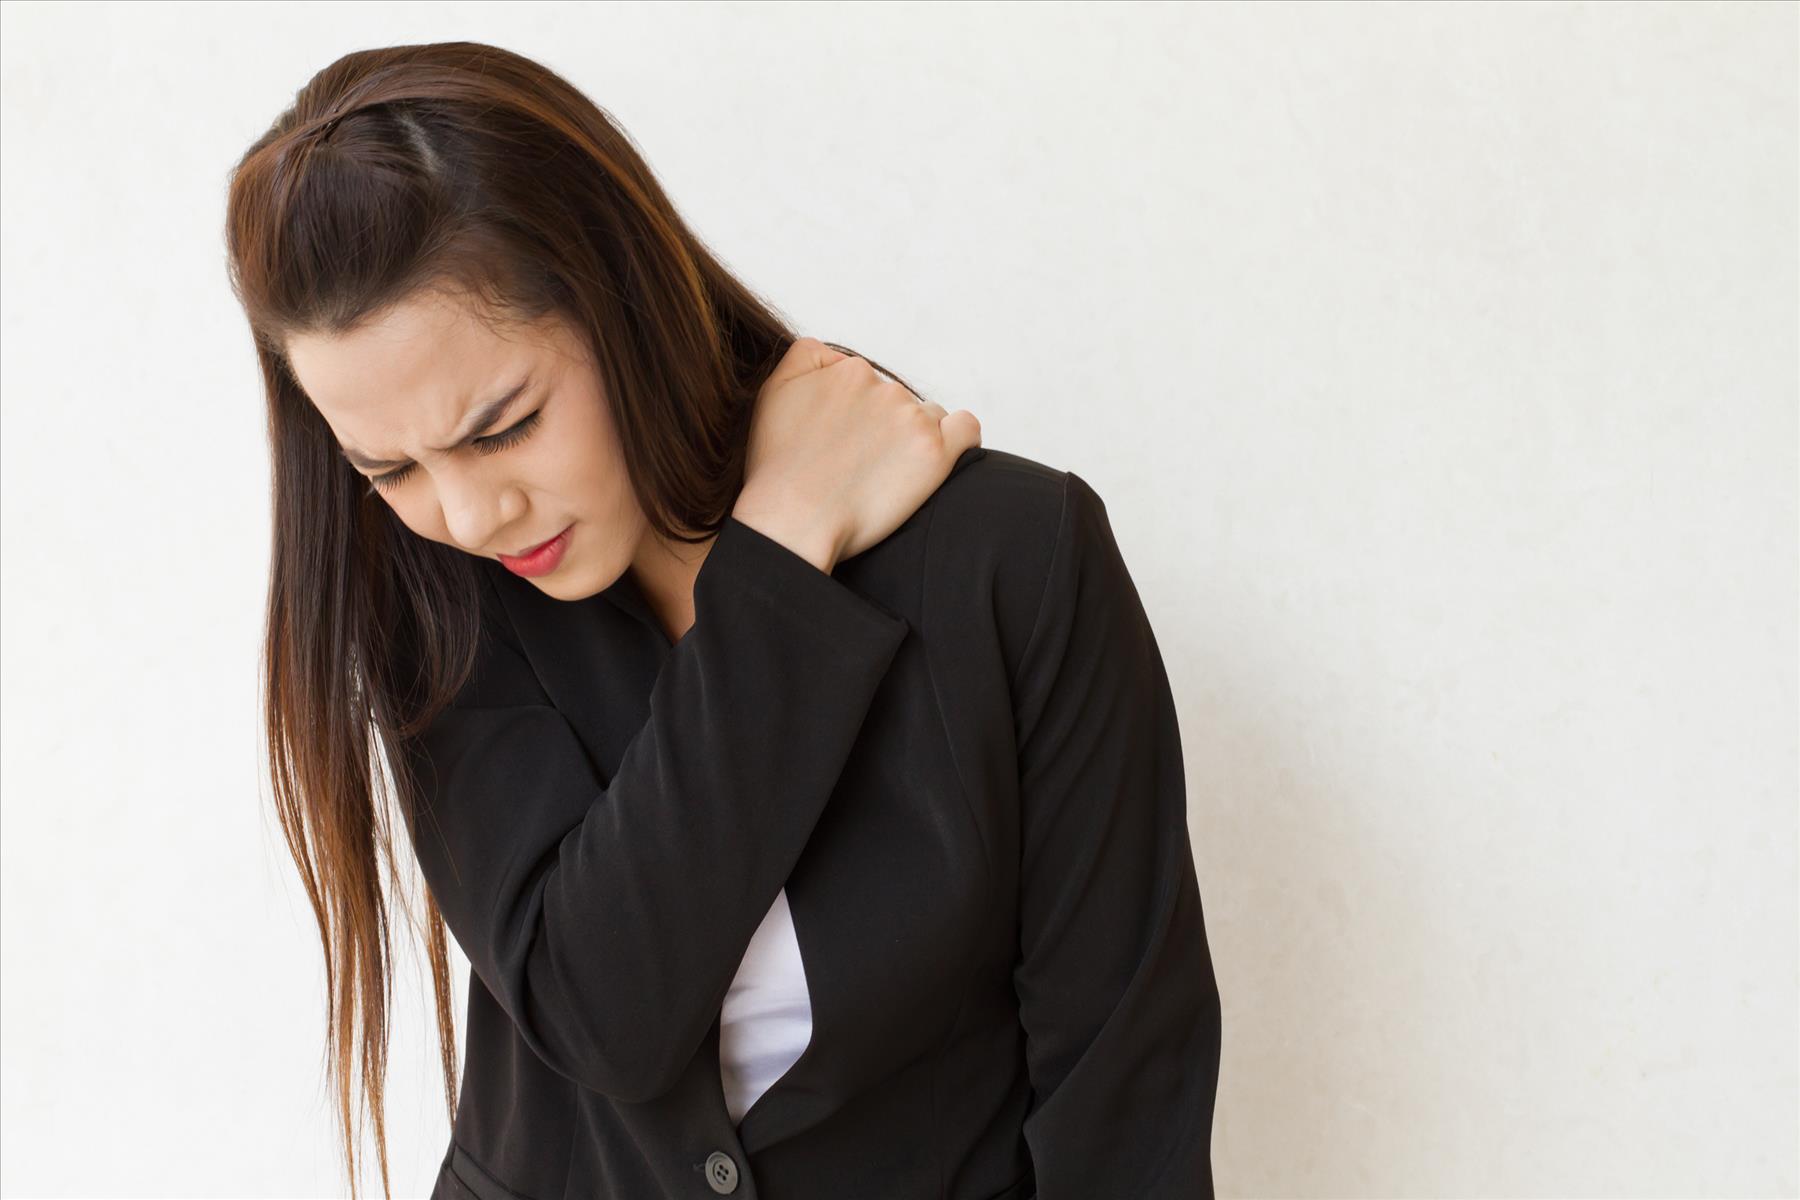 The Grades and Stages of a Neck Injury Claim